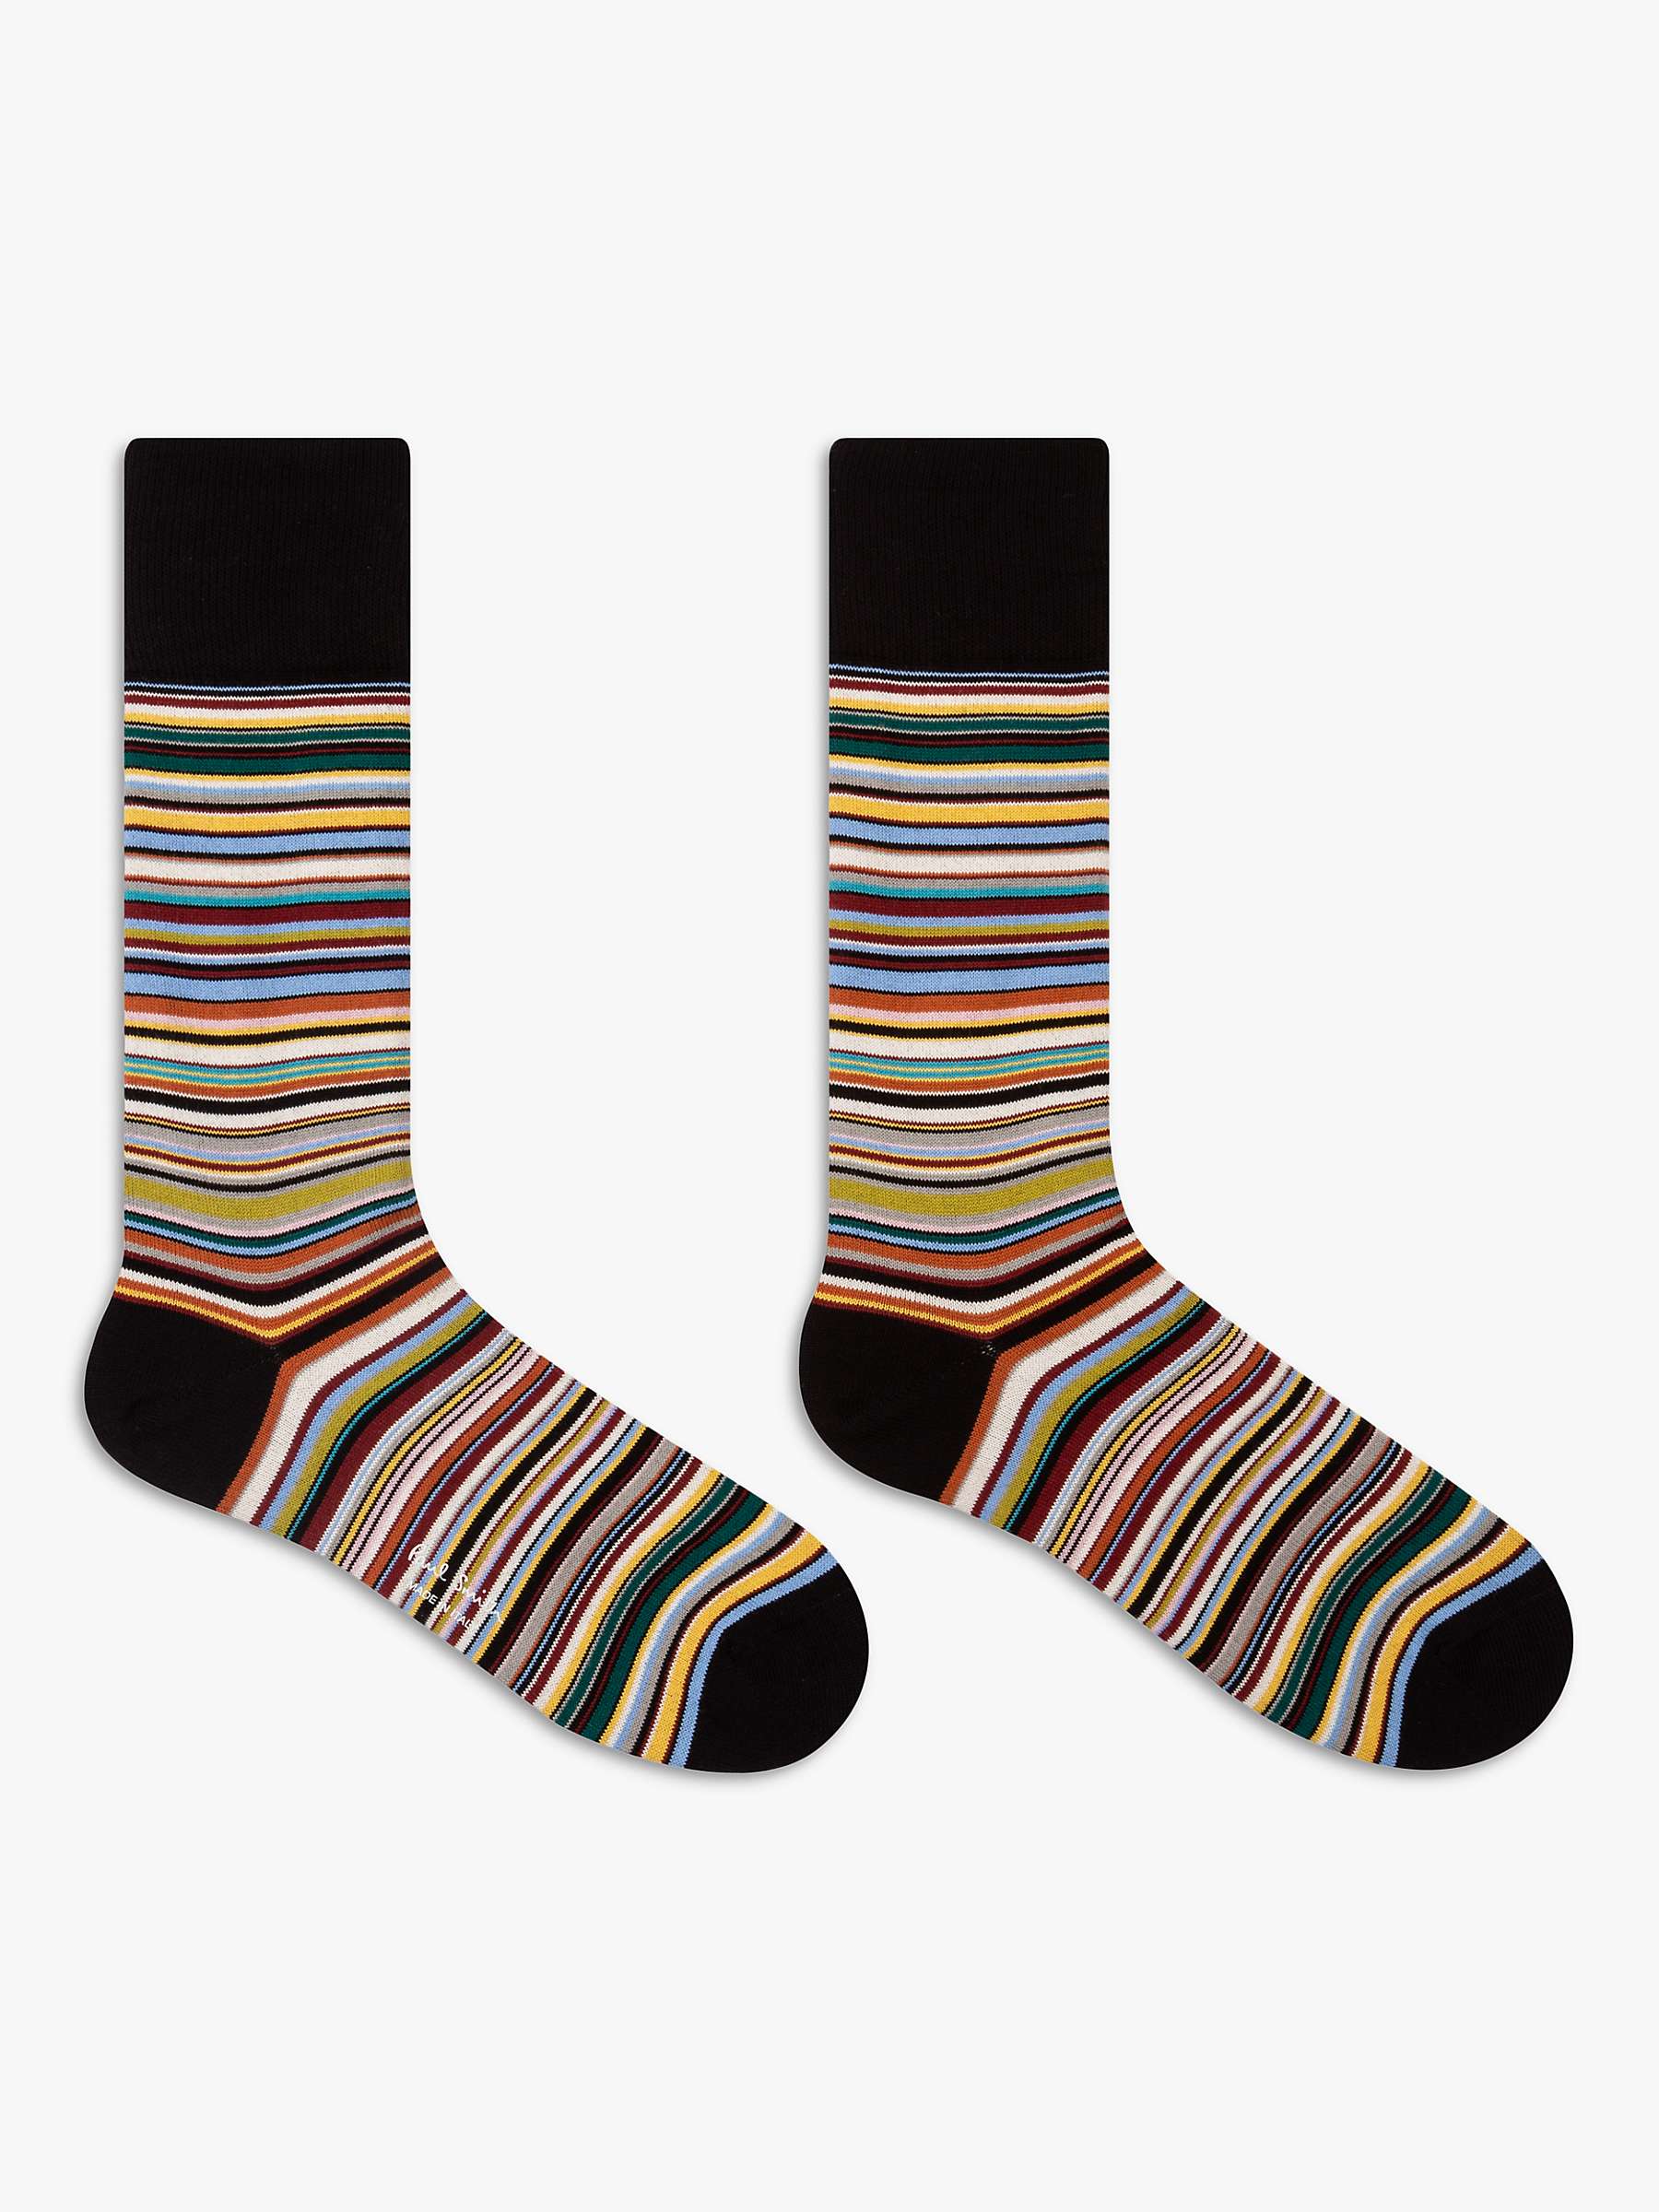 Paul Smith Signature Stripe Socks, Pack of 2, One Size, Sign Stripe at ...